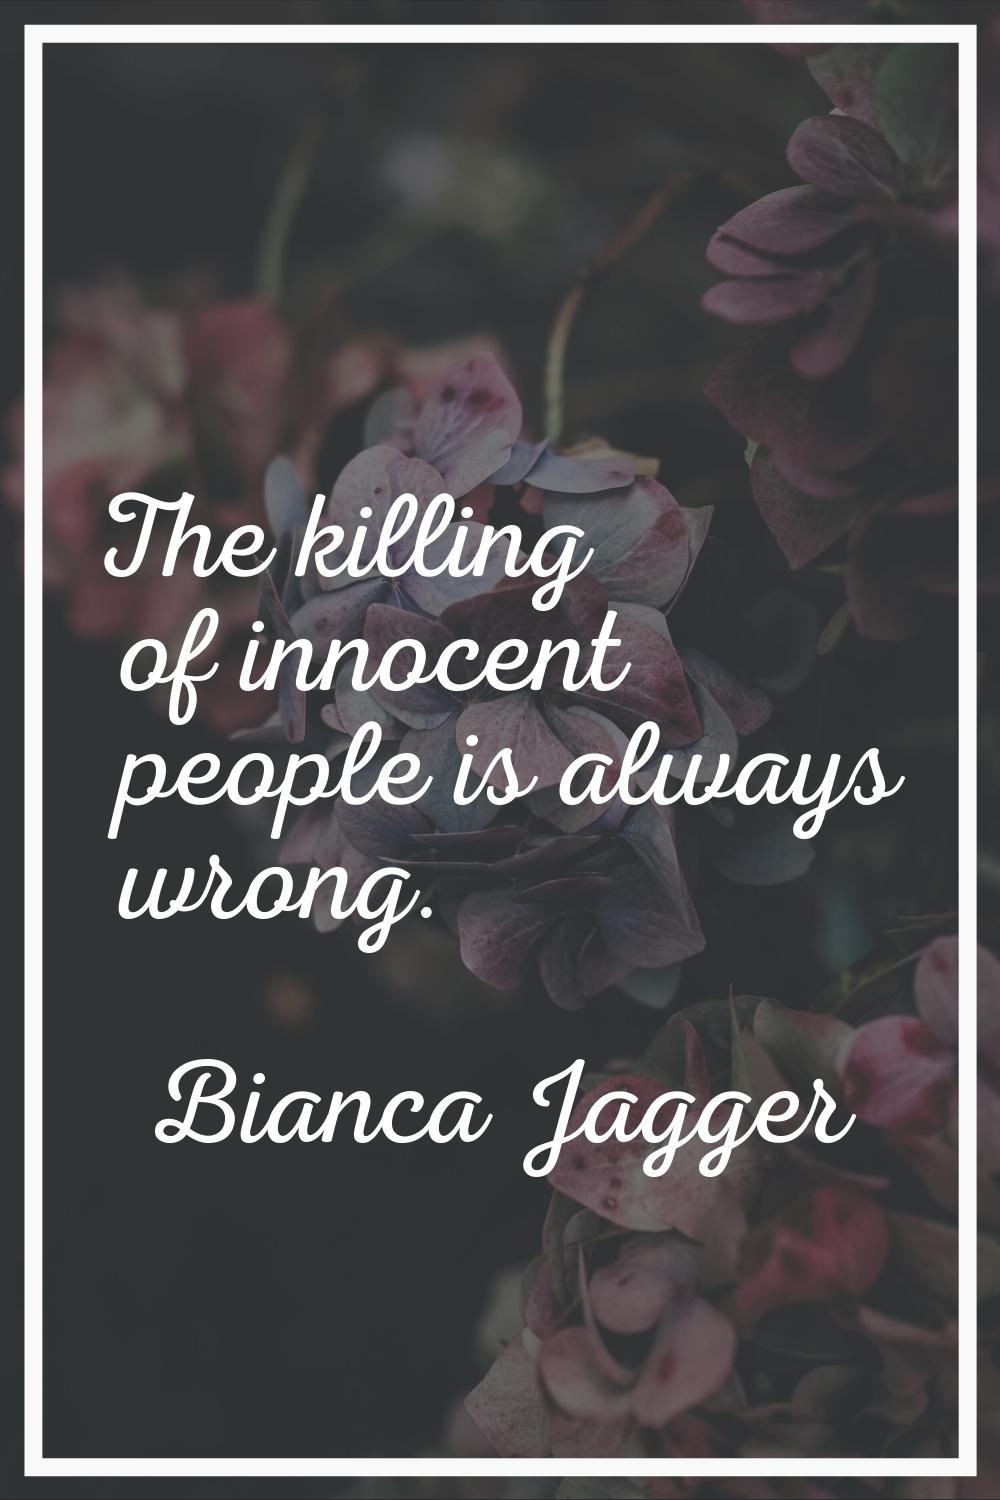 The killing of innocent people is always wrong.